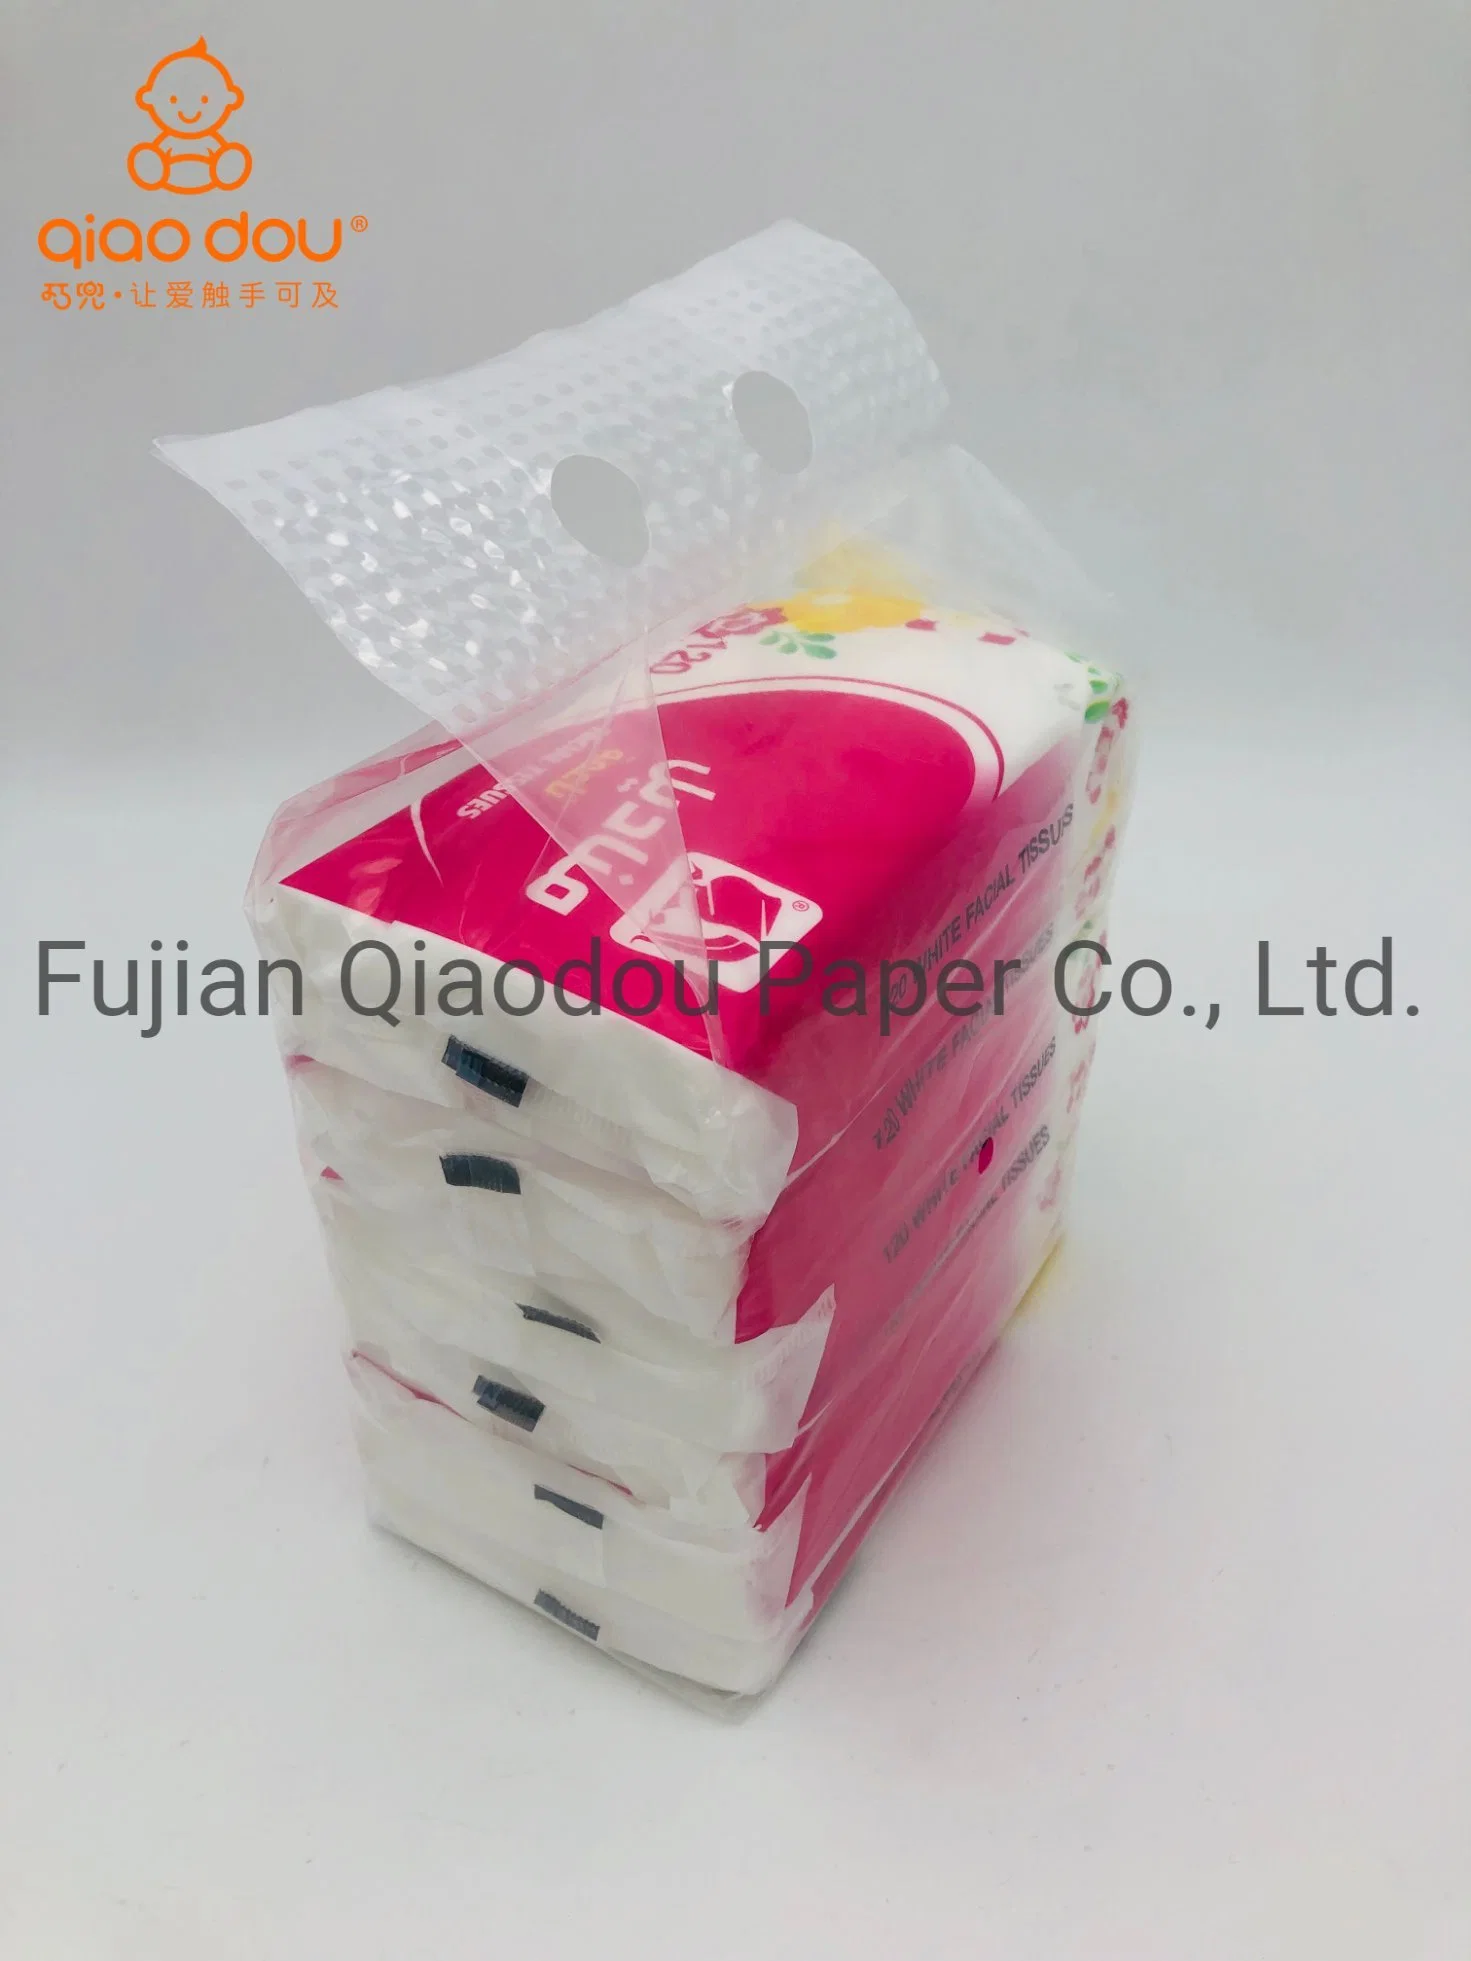 Qiaodou Virgin Wood Pulp High quality/High cost performance Big Discount Cheap Price Facial Paper Tissue